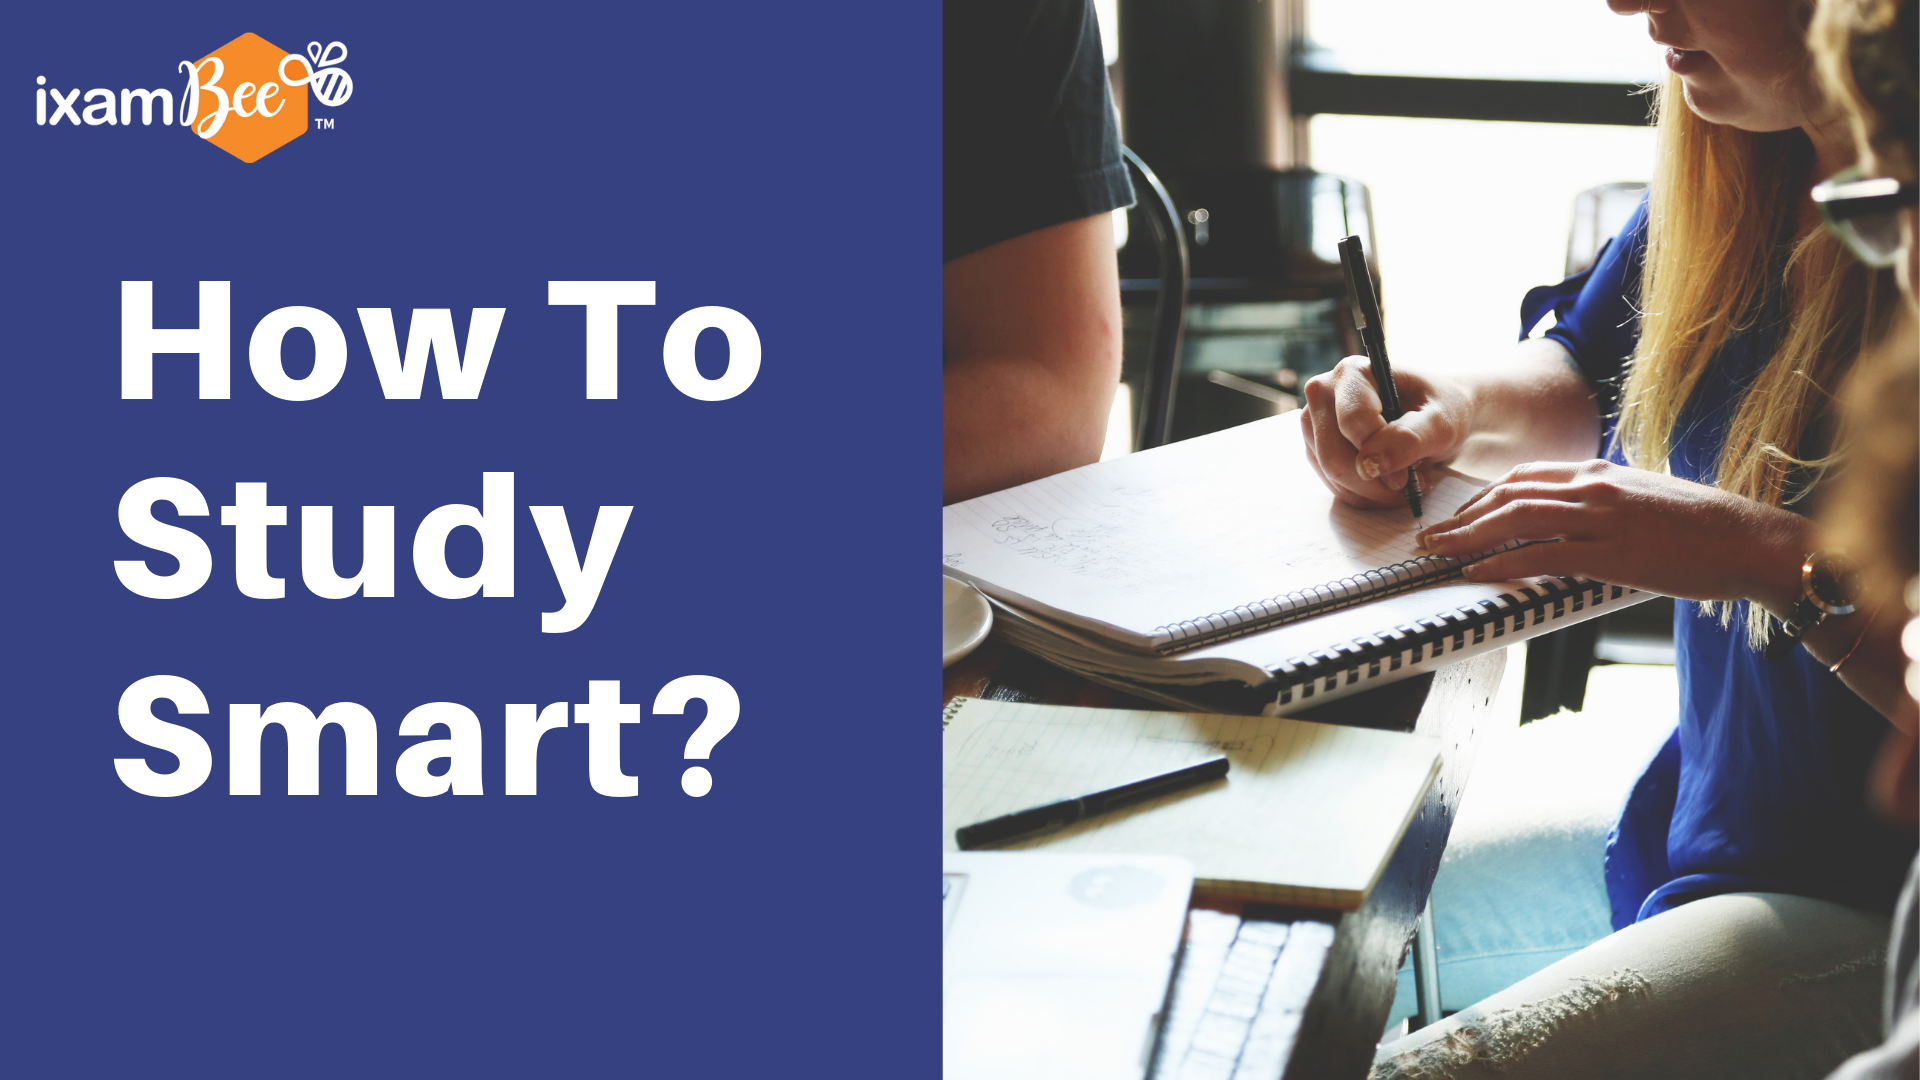 How To Study Smart